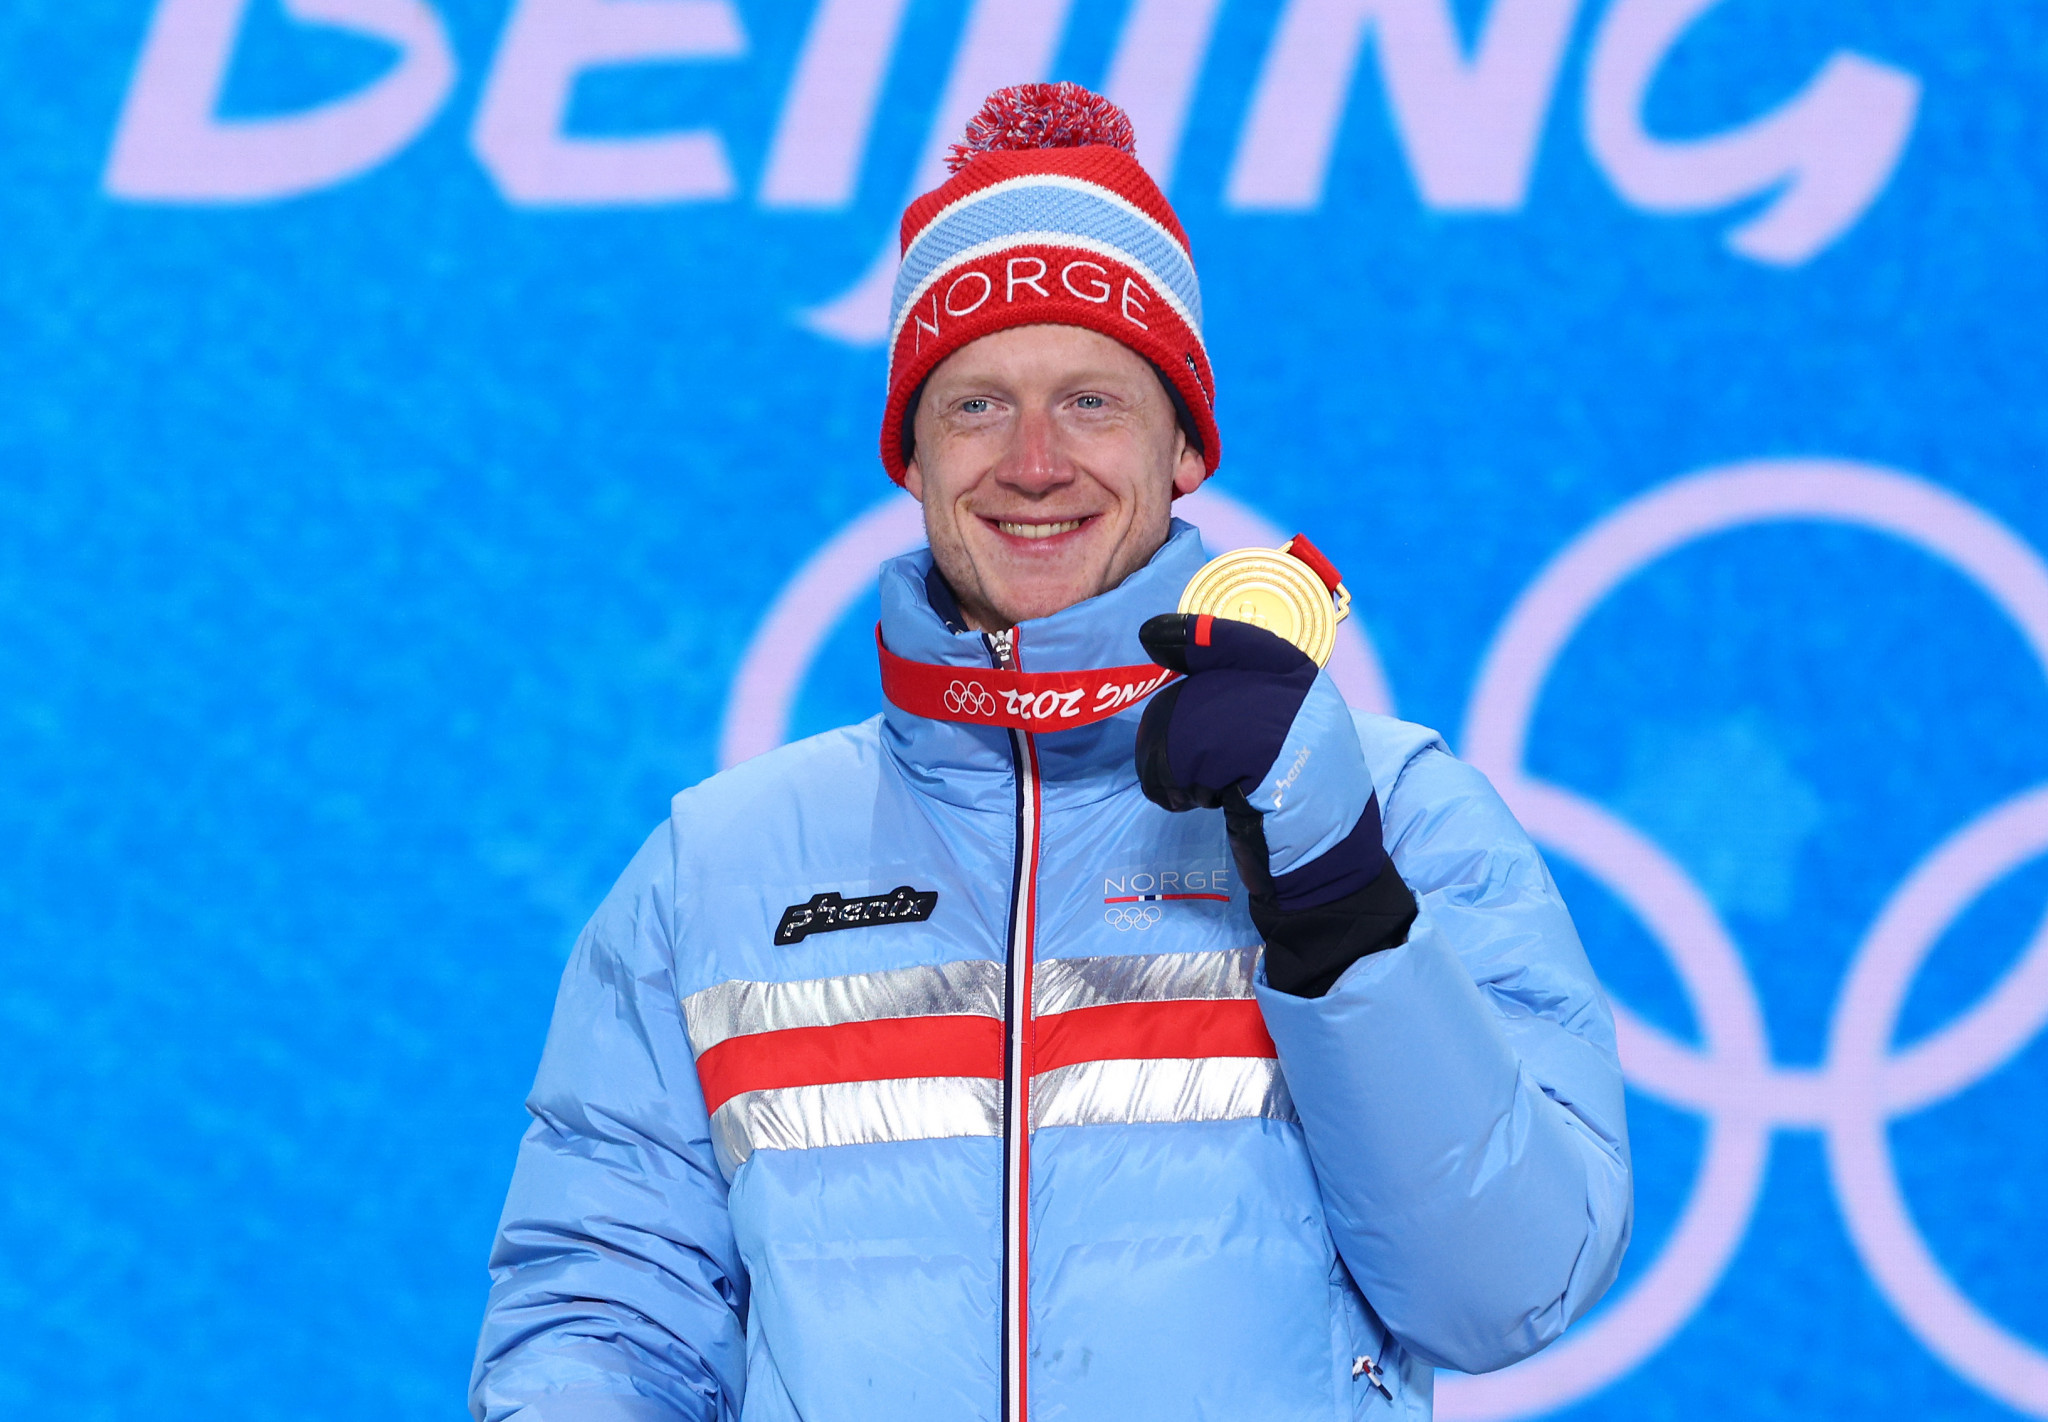 Johannes Thingnes Bø of Norway claimed more gold medals than any other athletes at Beijing 2022 with four ©Getty Images